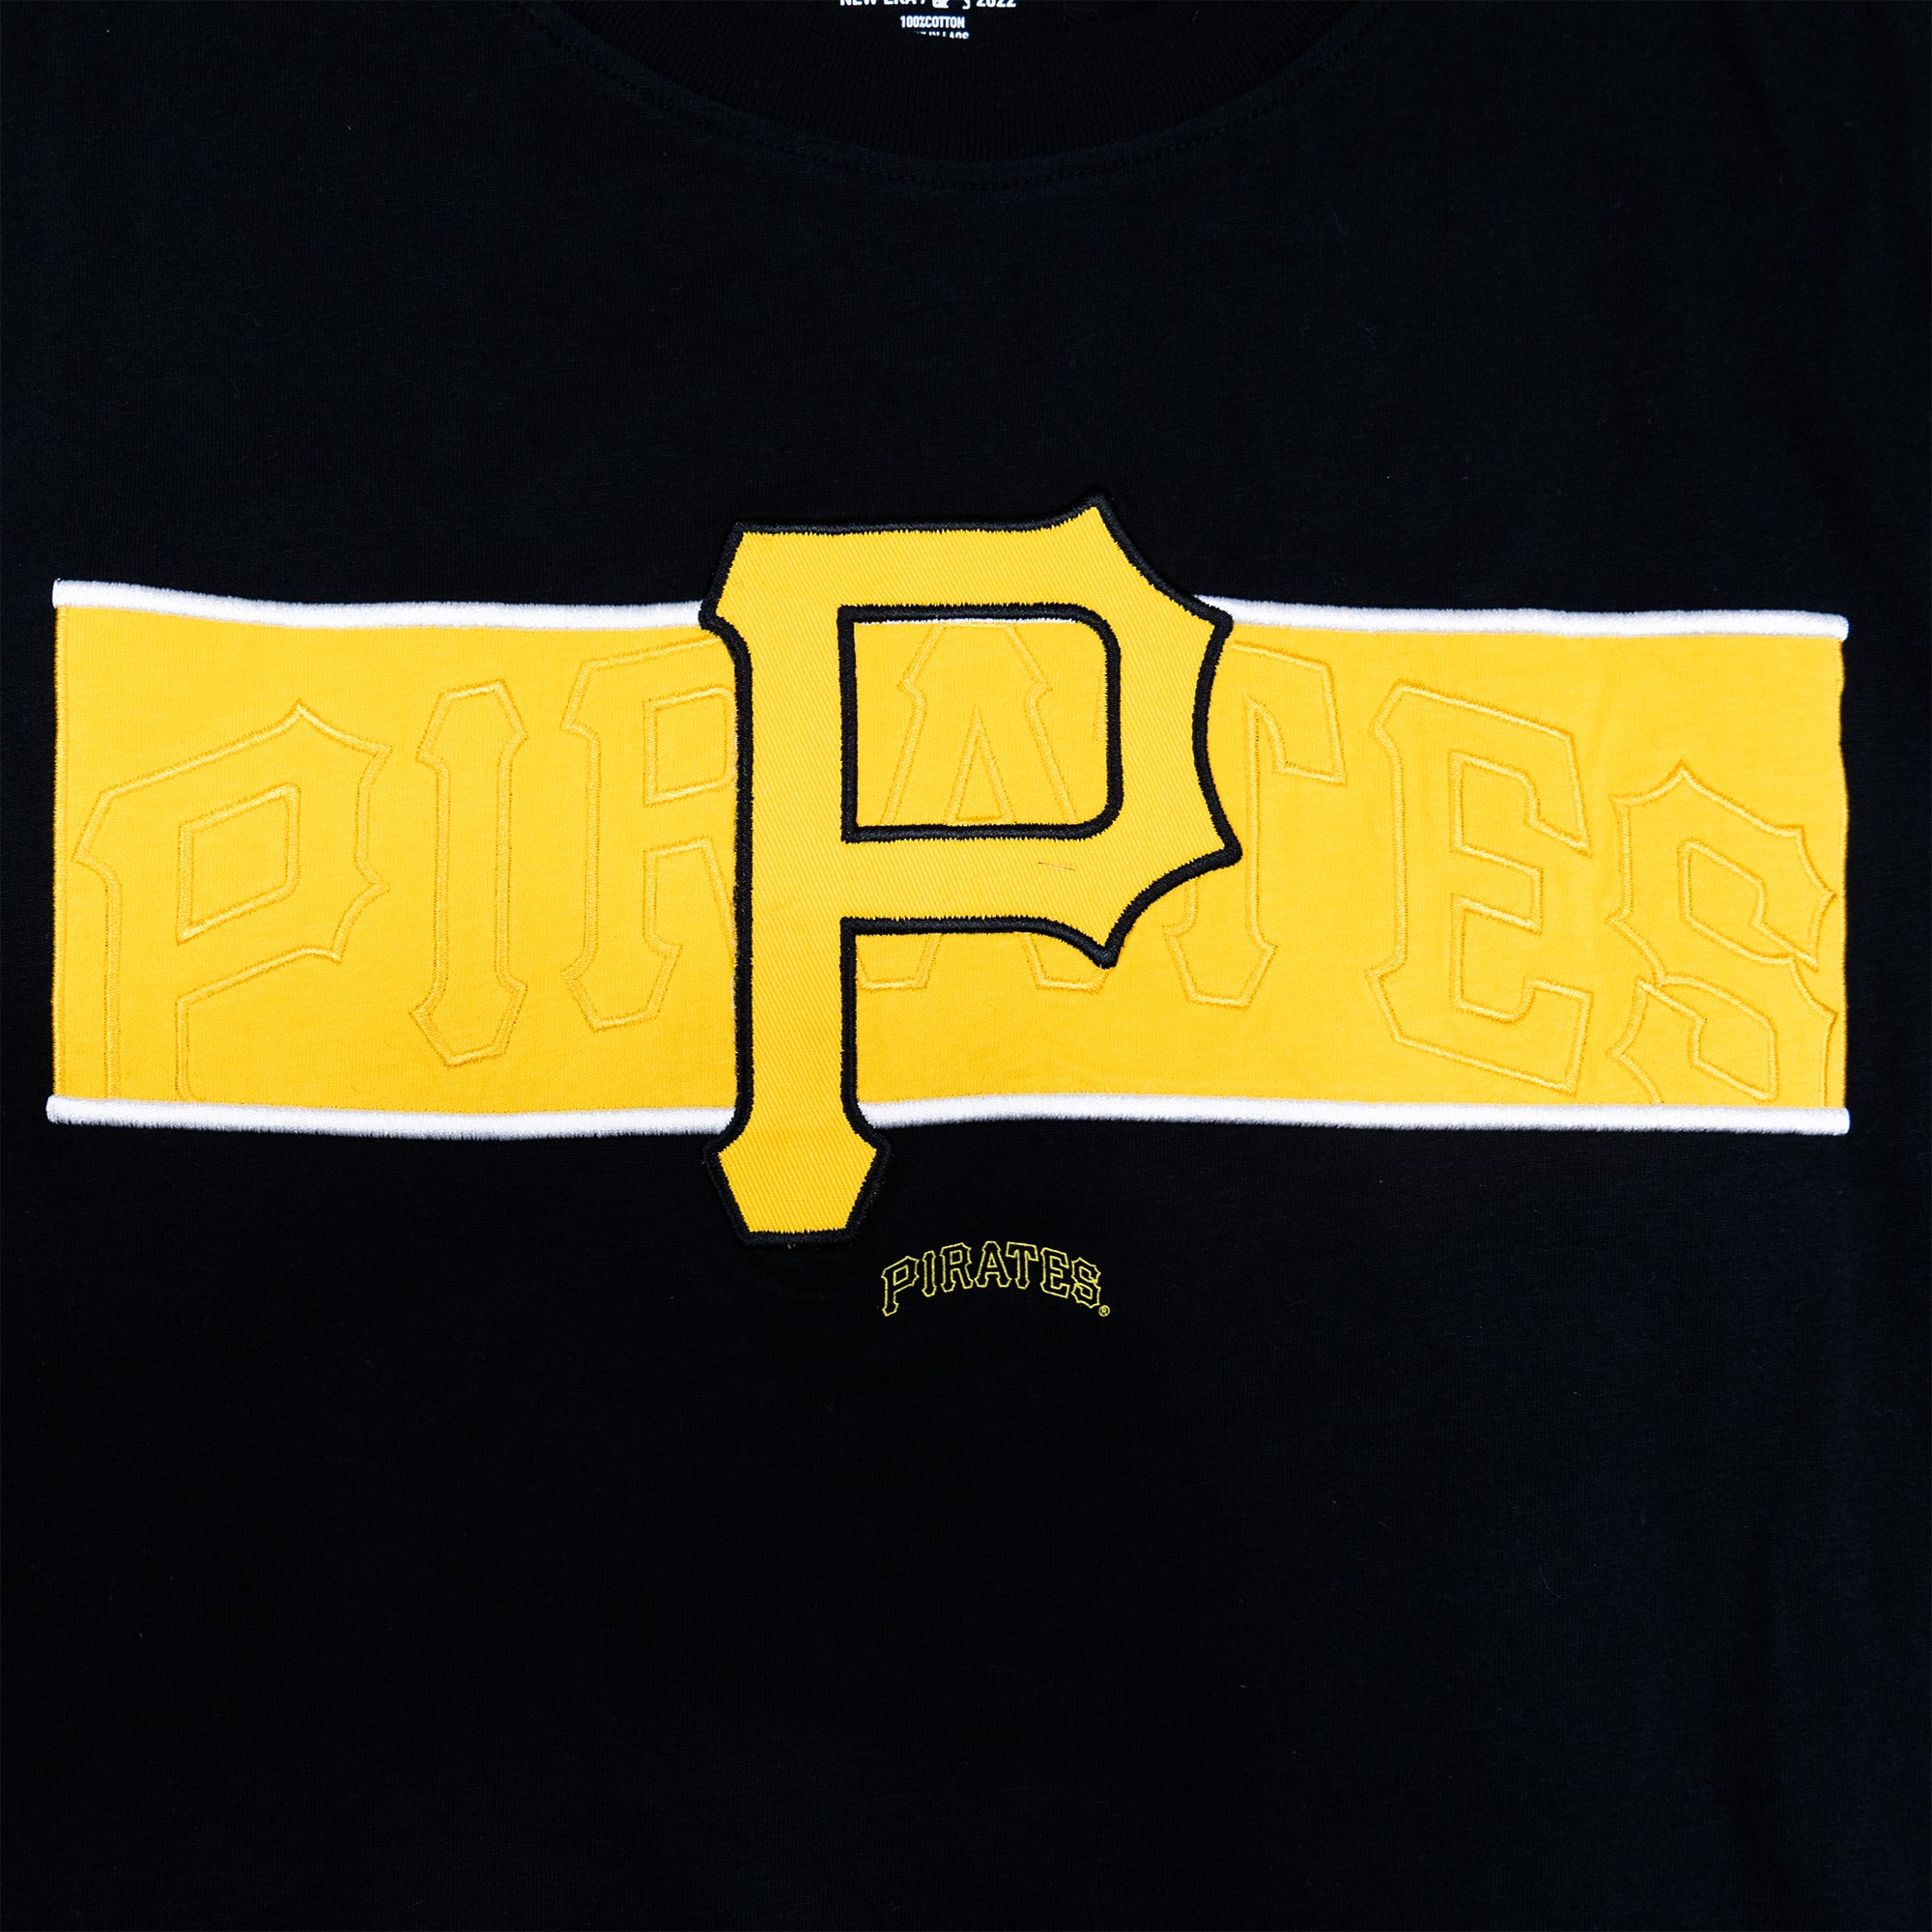 Pittsburgh Pirates T-Shirts for Sale